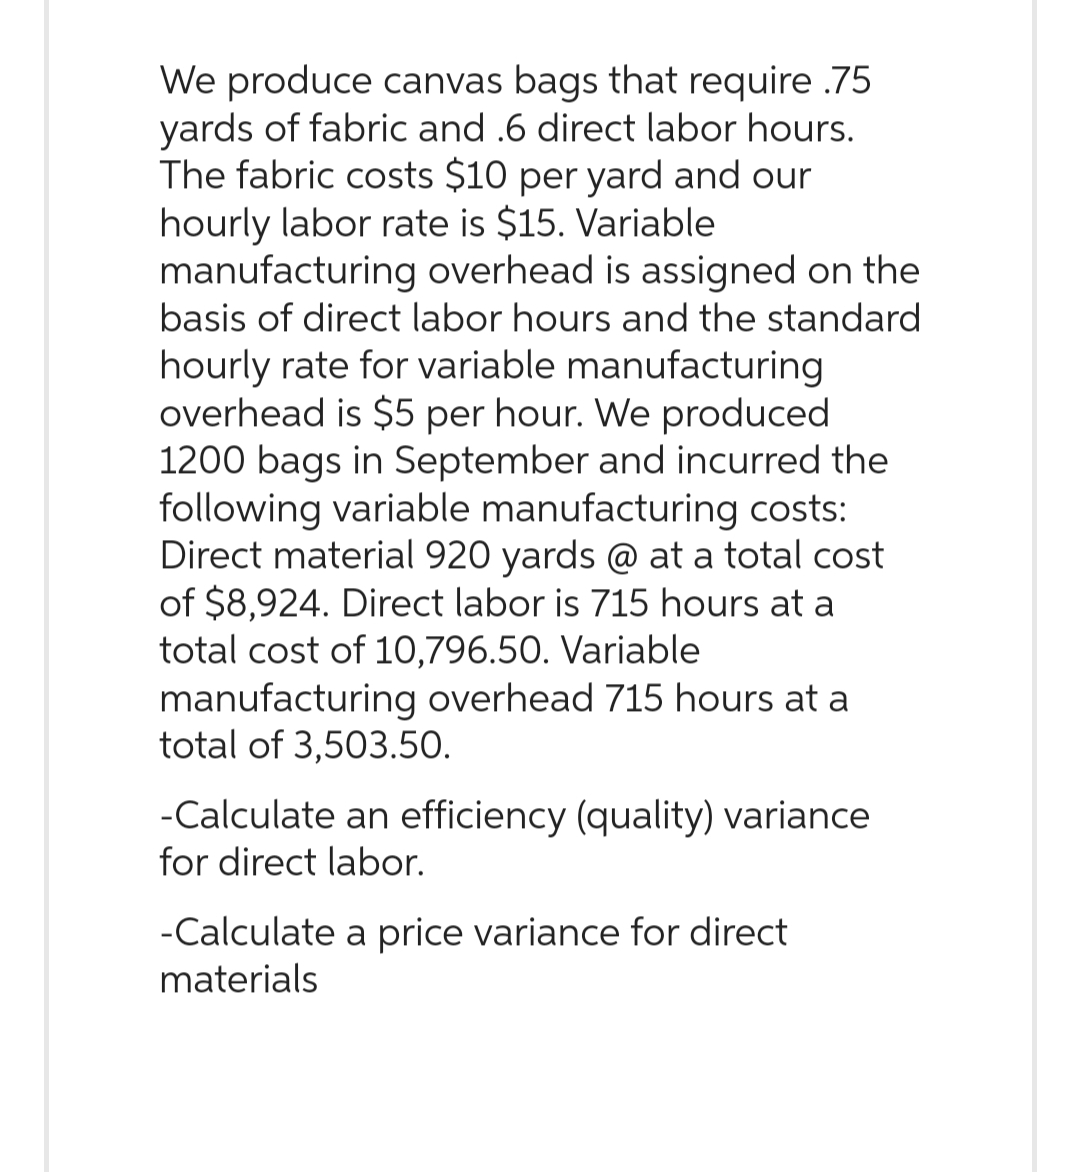 We produce canvas bags that require .75
yards of fabric and .6 direct labor hours.
The fabric costs $10 per yard and our
hourly labor rate is $15. Variable.
manufacturing overhead is assigned on the
basis of direct labor hours and the standard
hourly rate for variable manufacturing
overhead is $5 per hour. We produced
1200 bags in September and incurred the
following variable manufacturing costs:
Direct material 920 yards @ at a total cost
of $8,924. Direct labor is 715 hours at a
total cost of 10,796.50. Variable
manufacturing overhead 715 hours at a
total of 3,503.50.
-Calculate an efficiency (quality) variance
for direct labor.
-Calculate a price variance for direct
materials